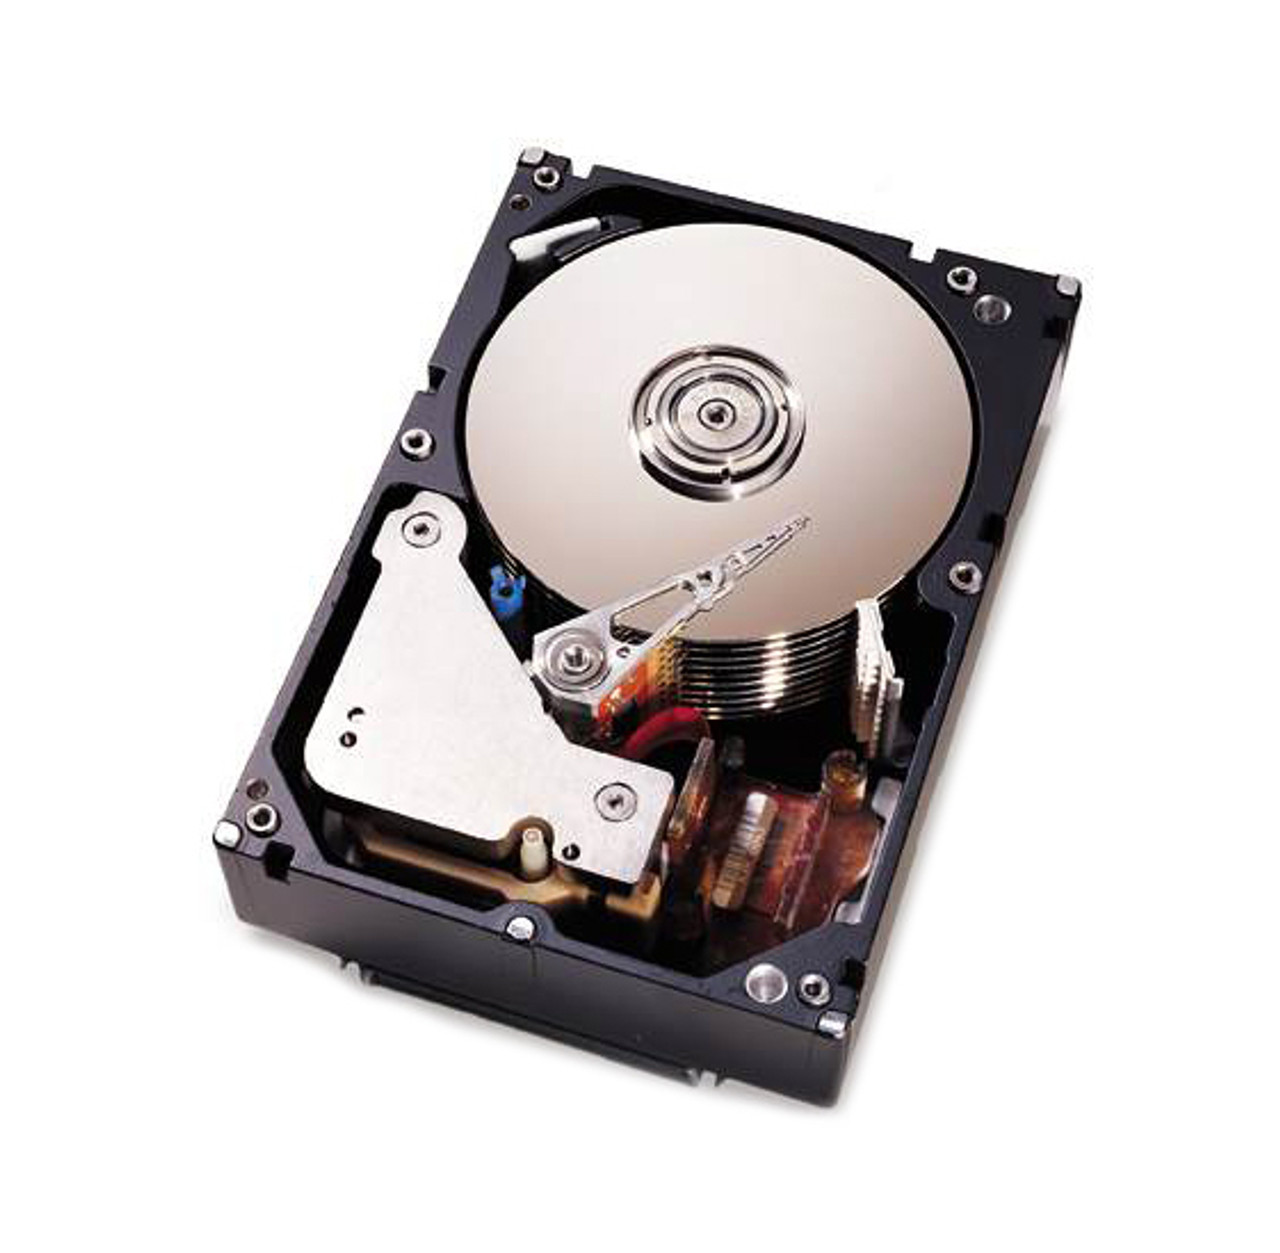 0K44052681348A Dell 73GB 15000RPM Ultra-320 SCSI 80-Pin Hot Swap 8MB Cache 3.5-inch Internal Hard Drive with Tray